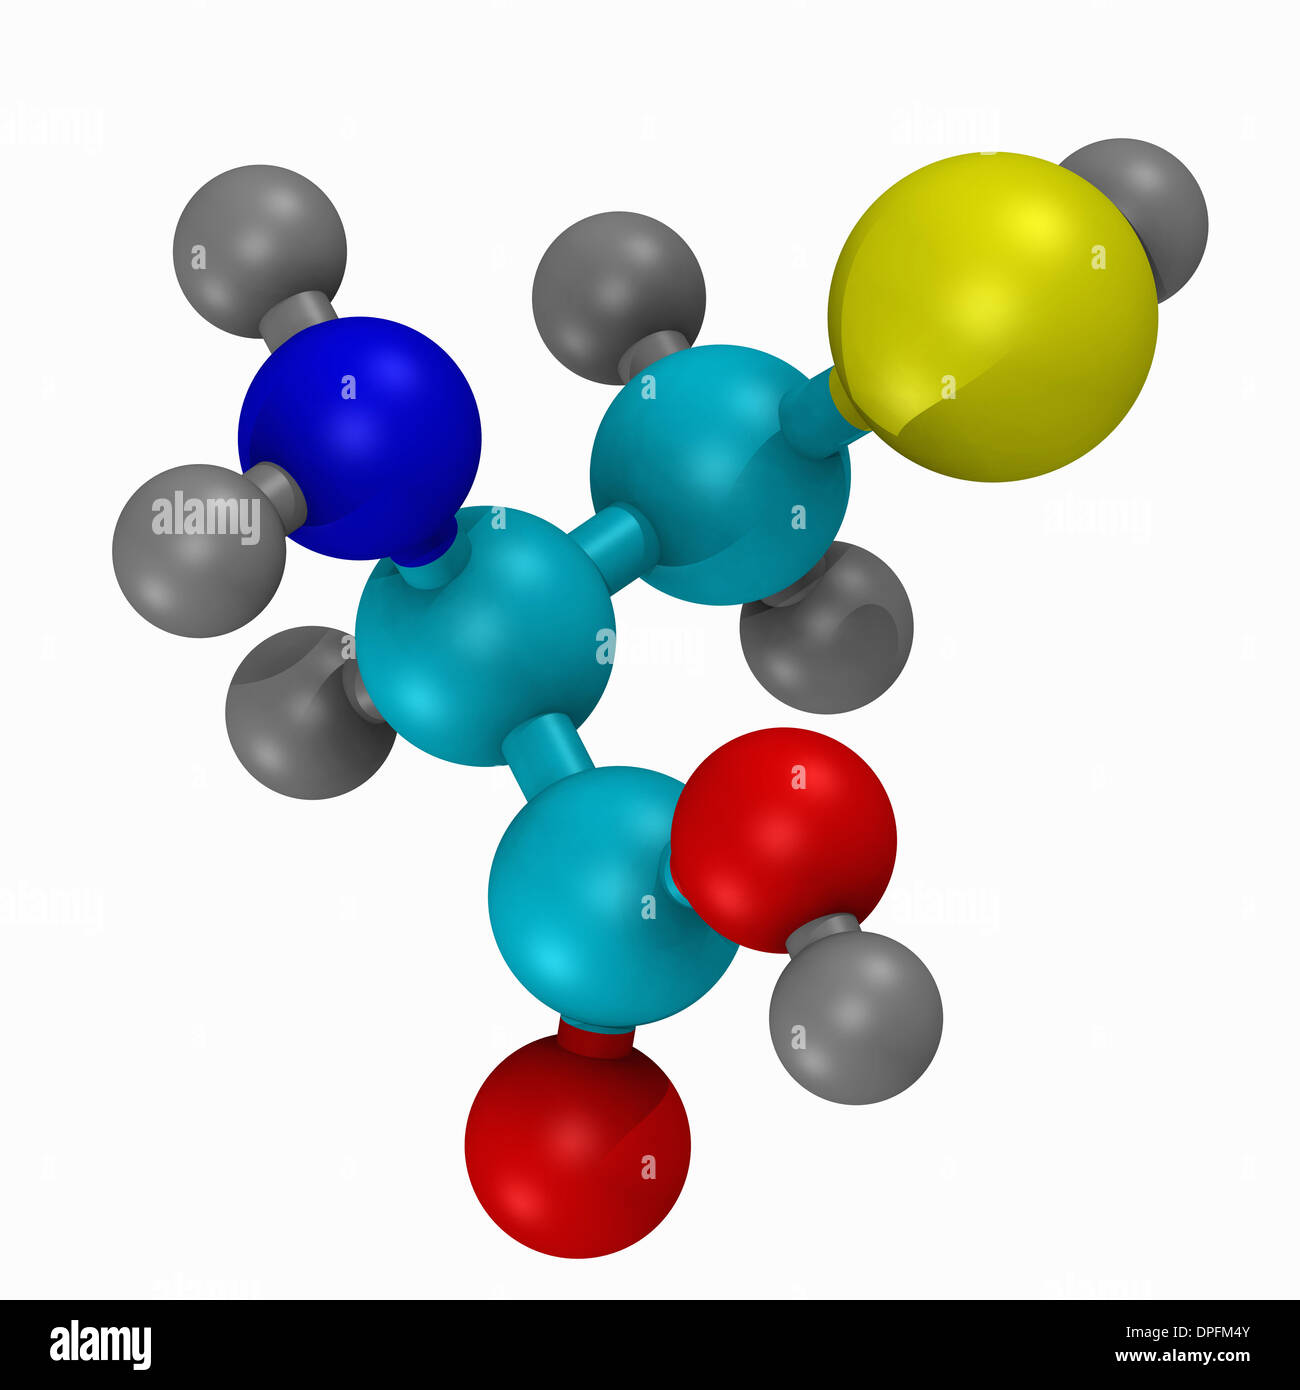 ball and stick model of the amino acid, cysteine Stock Photo